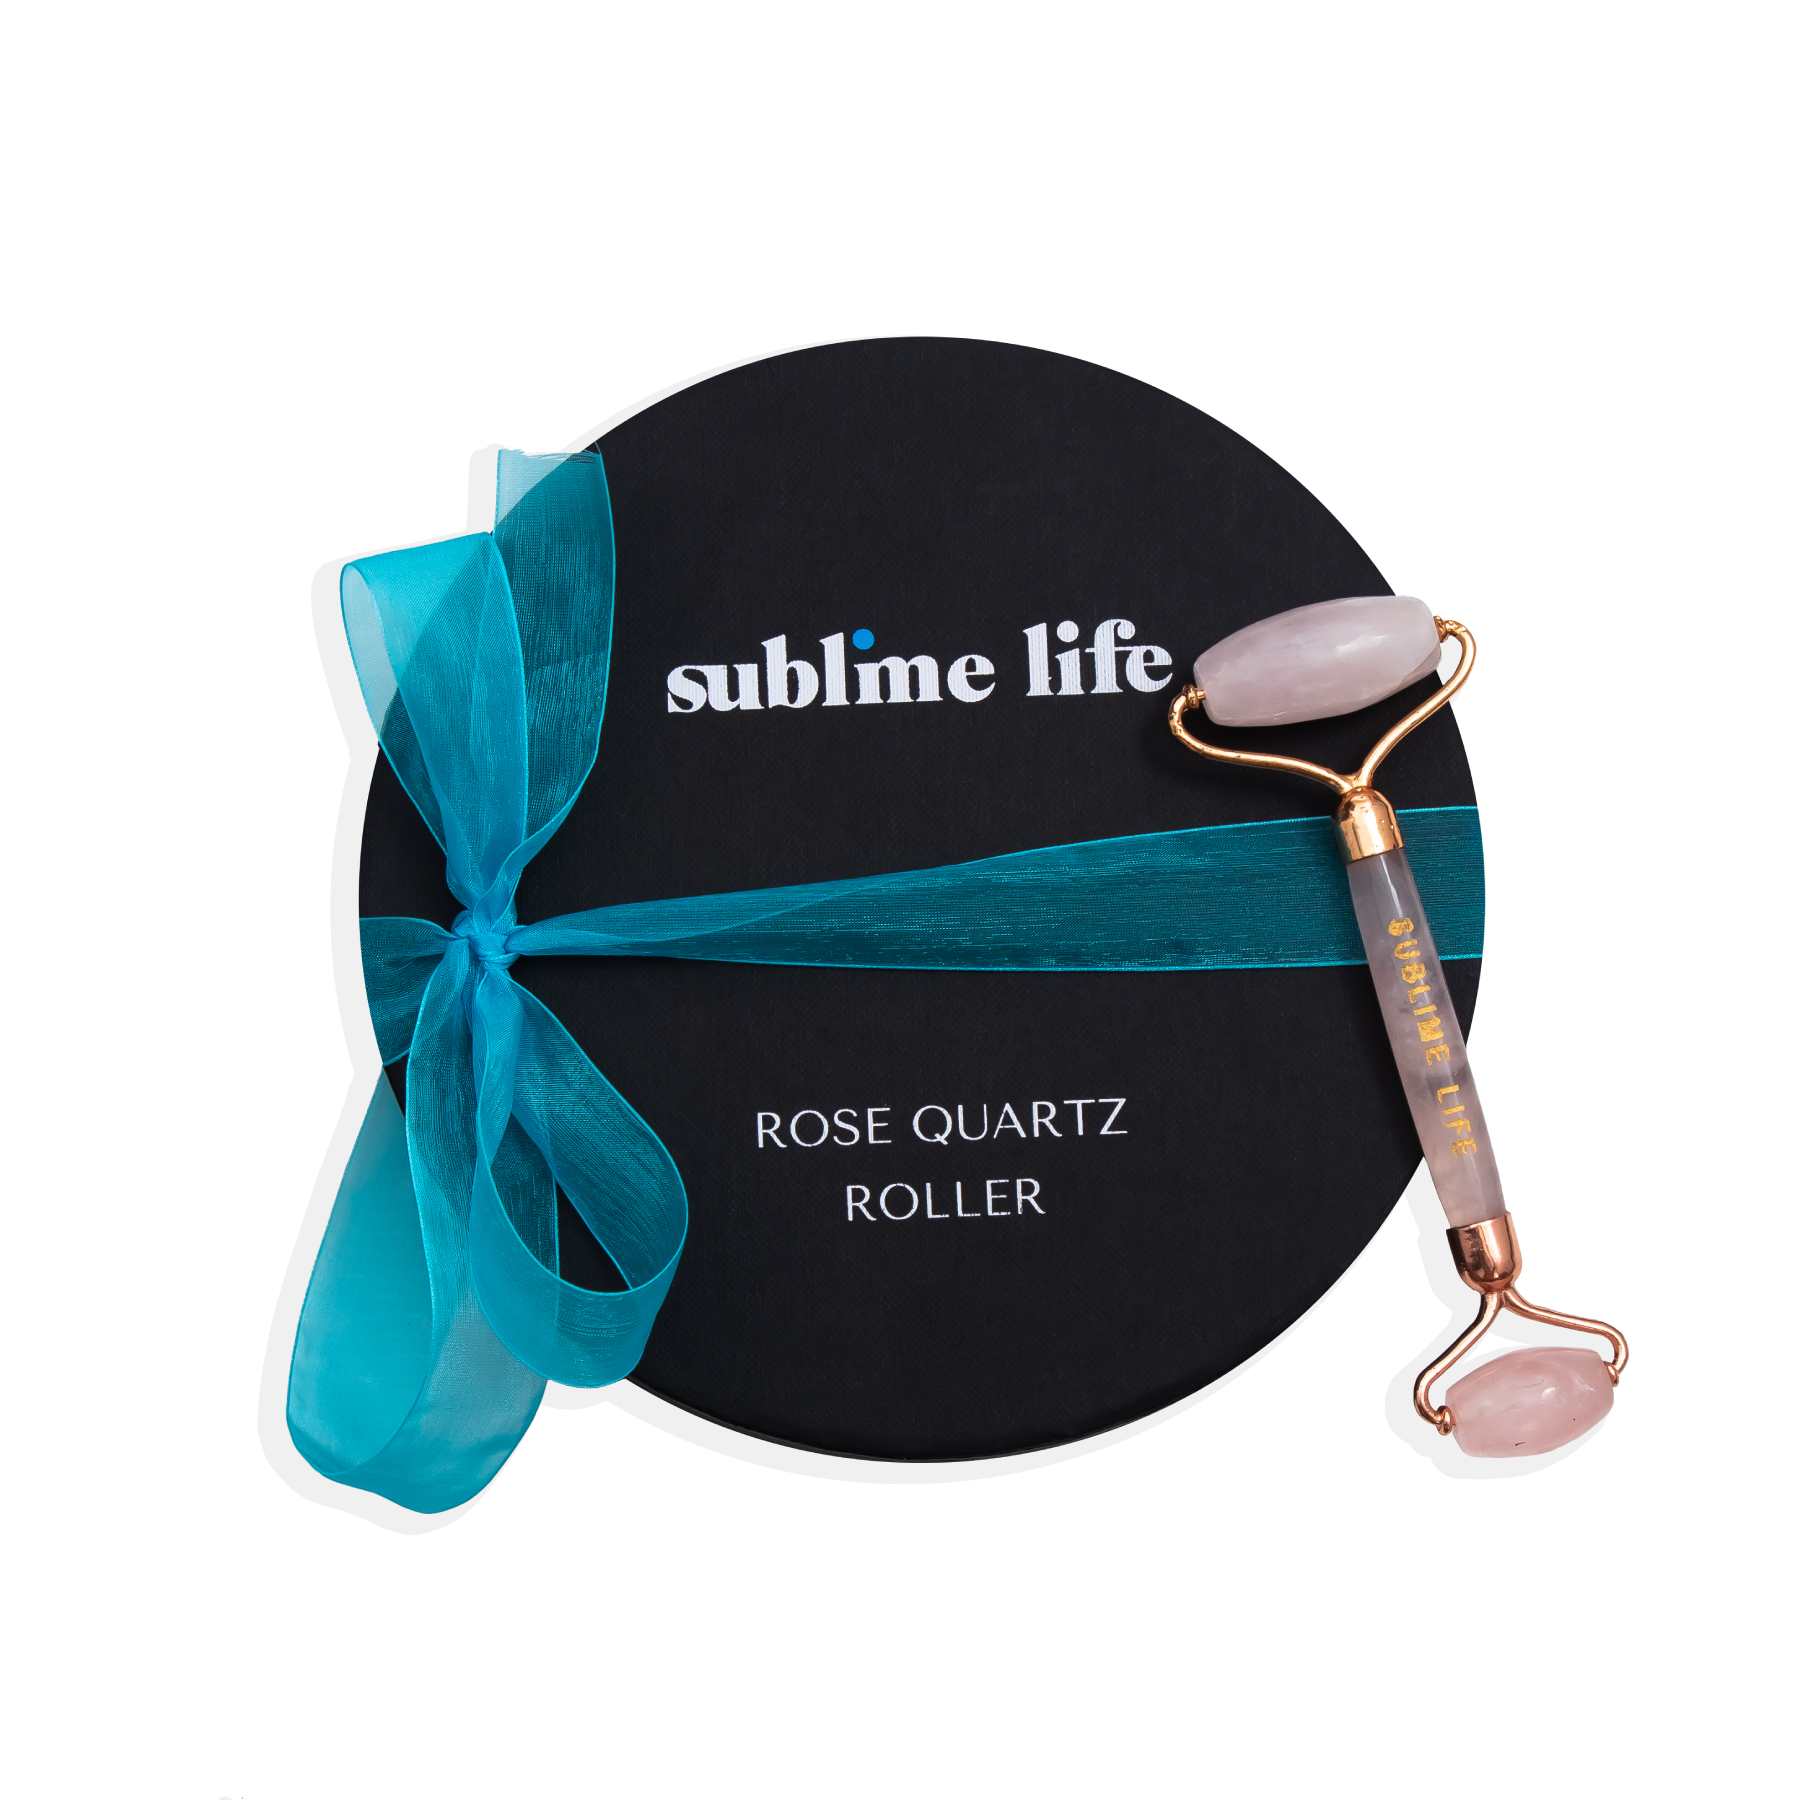 Shop Rose Quartz Roller on SublimeLife.in. Best for re-energising your skin giving it a glow.